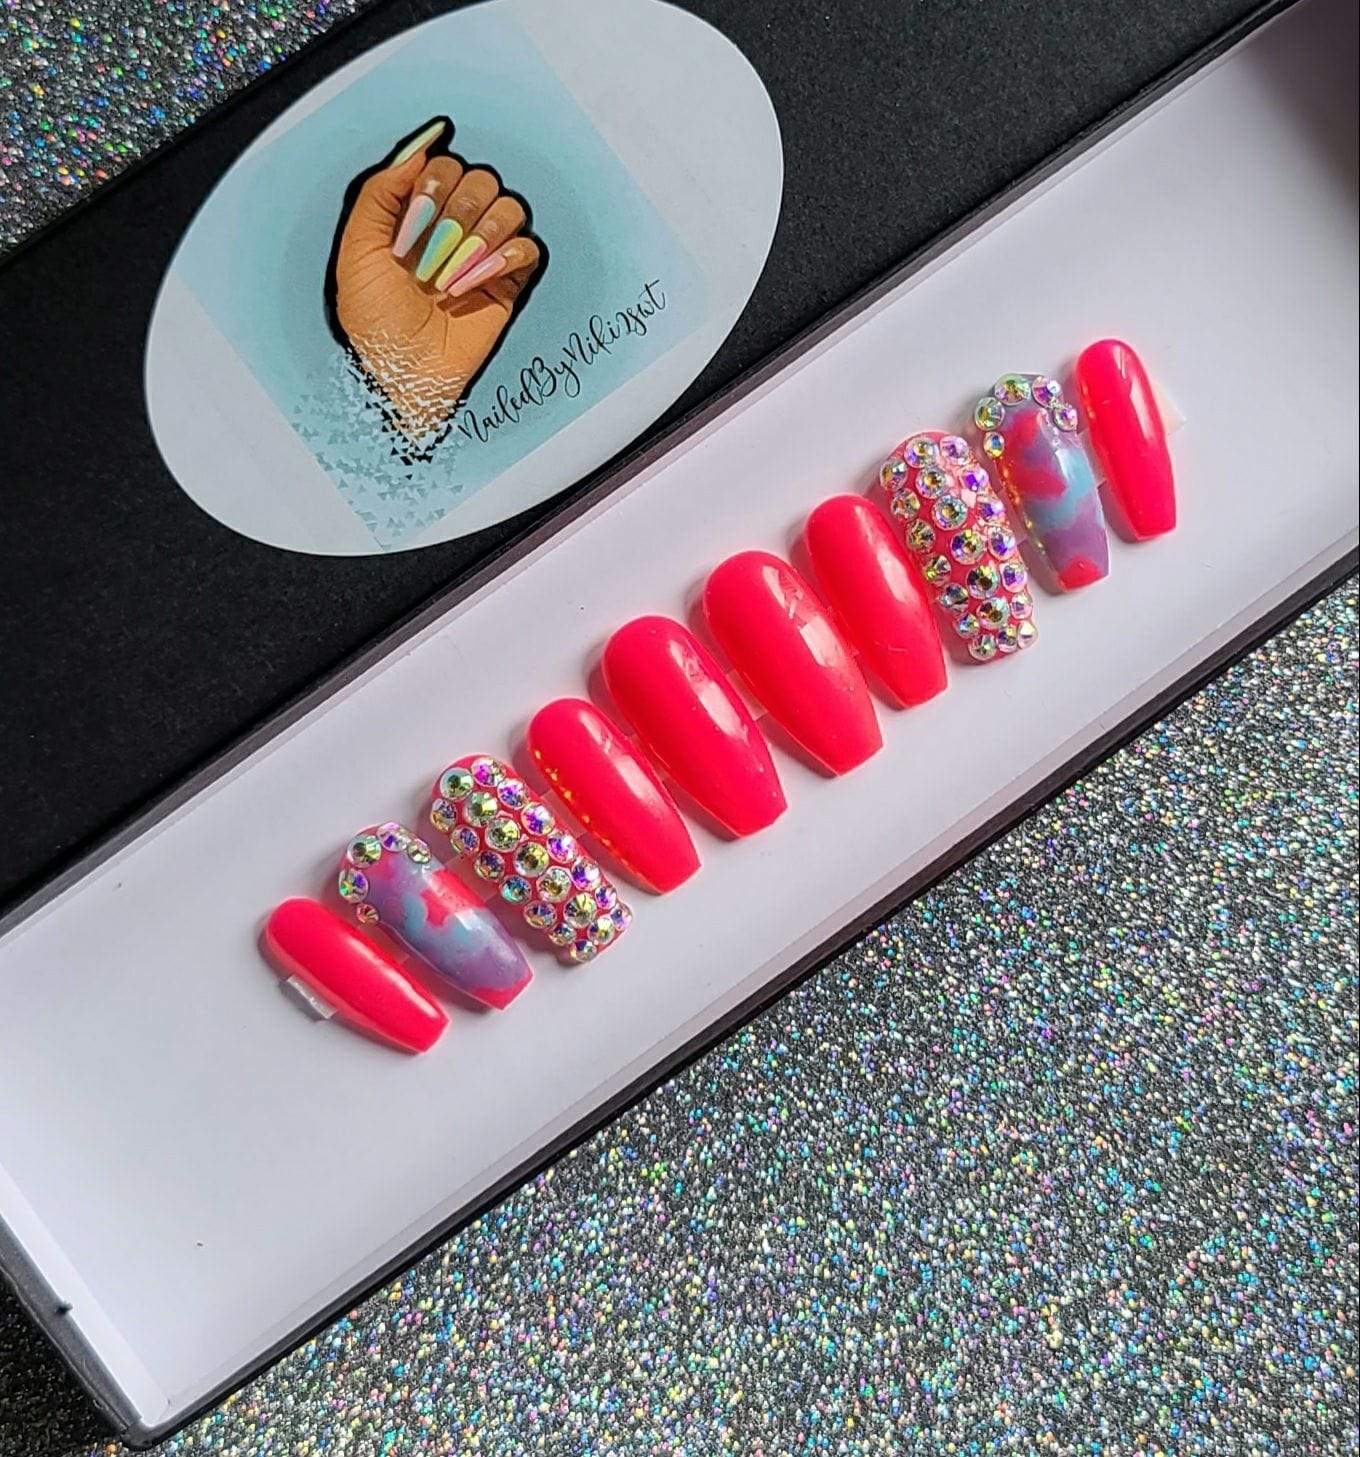 NailedByNiki2swt Get Nailed Monthly Box - July 2022 Press on Nails Self Care Accessories